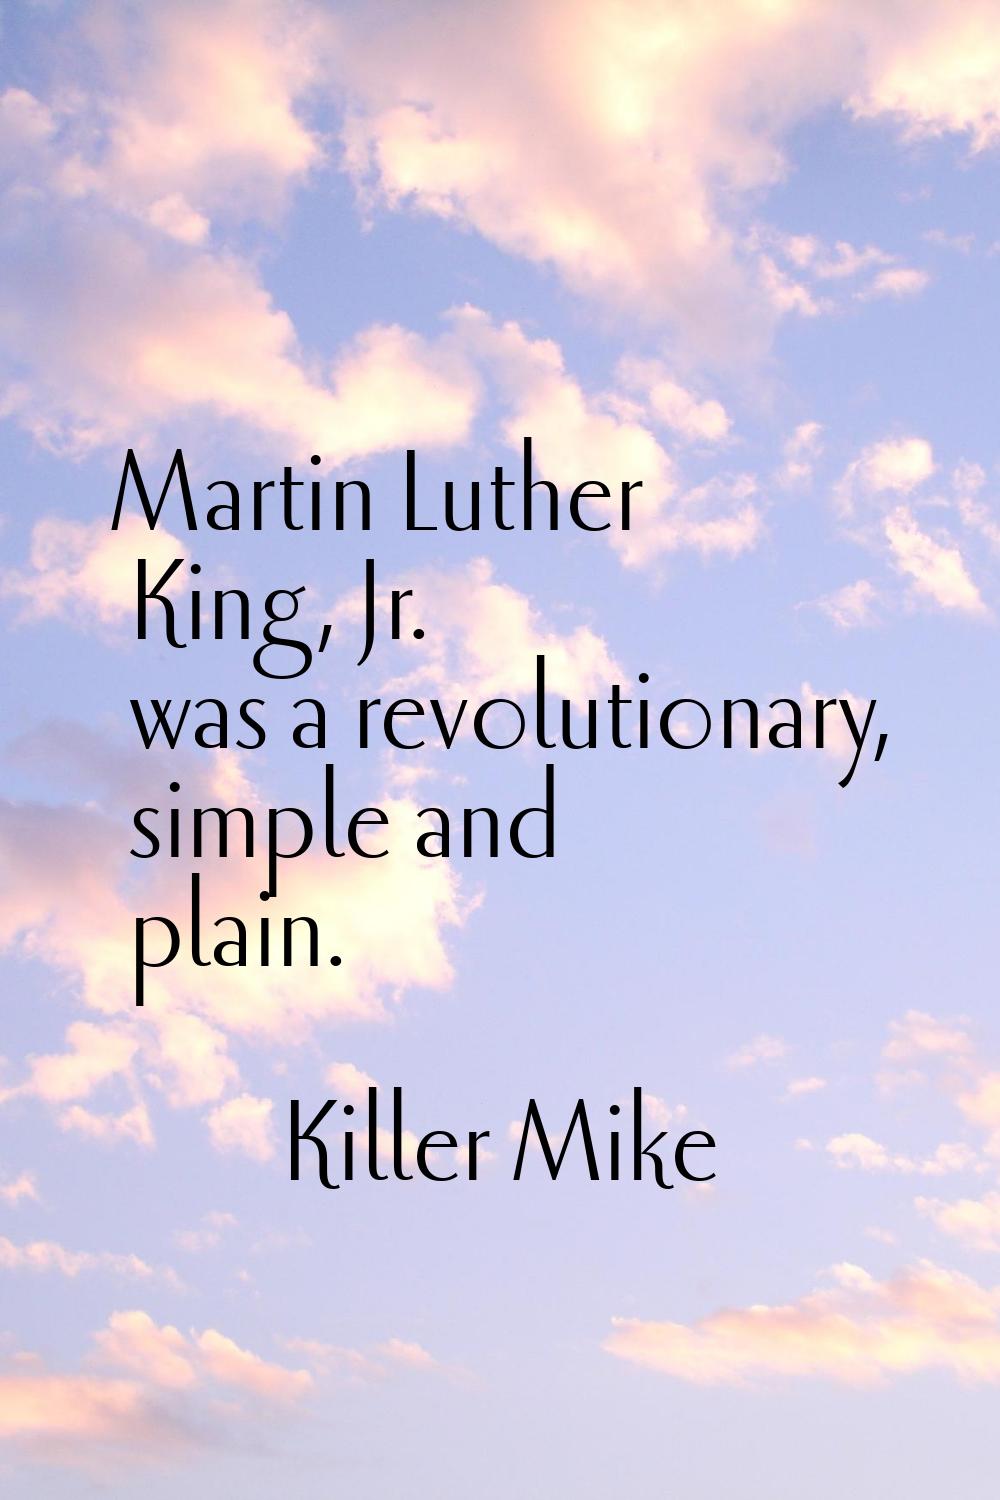 Martin Luther King, Jr. was a revolutionary, simple and plain.